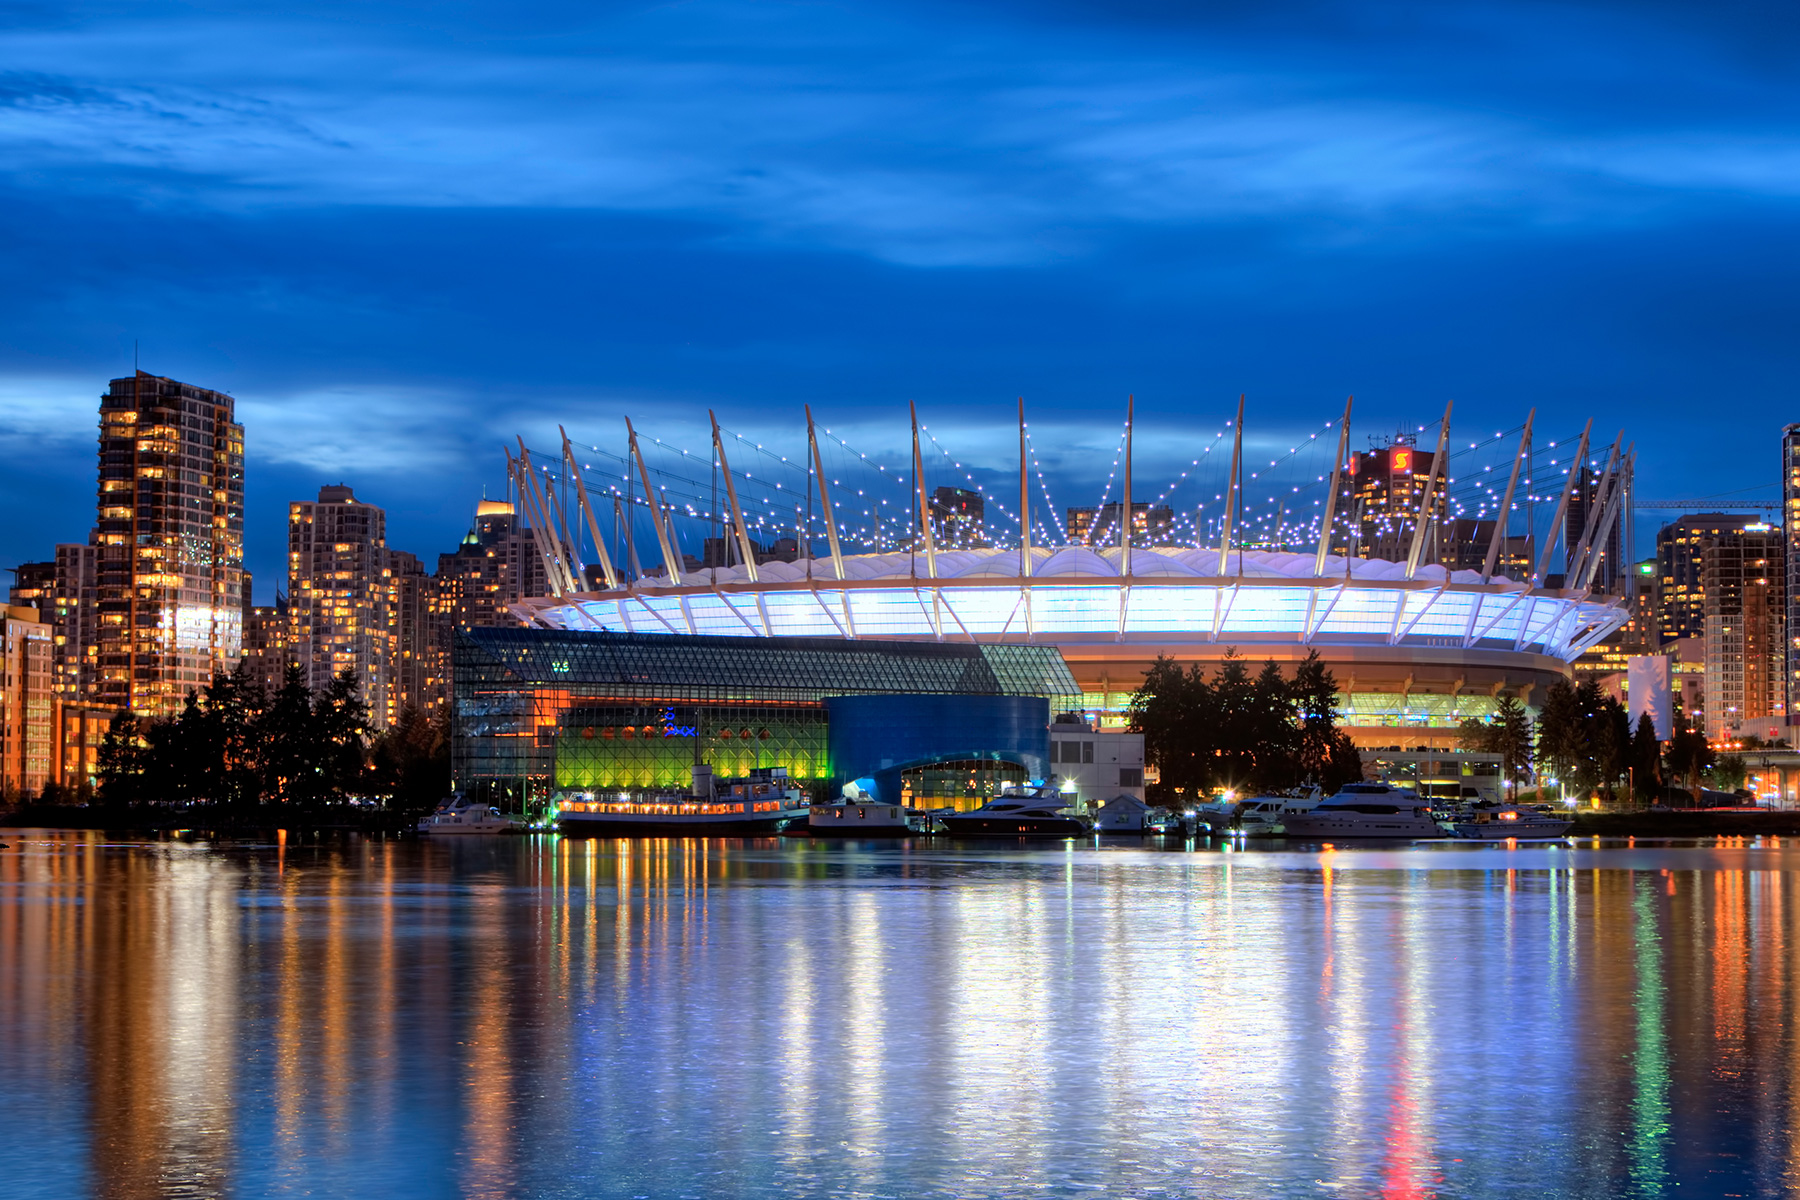 BC Place Stadium in Vancouver